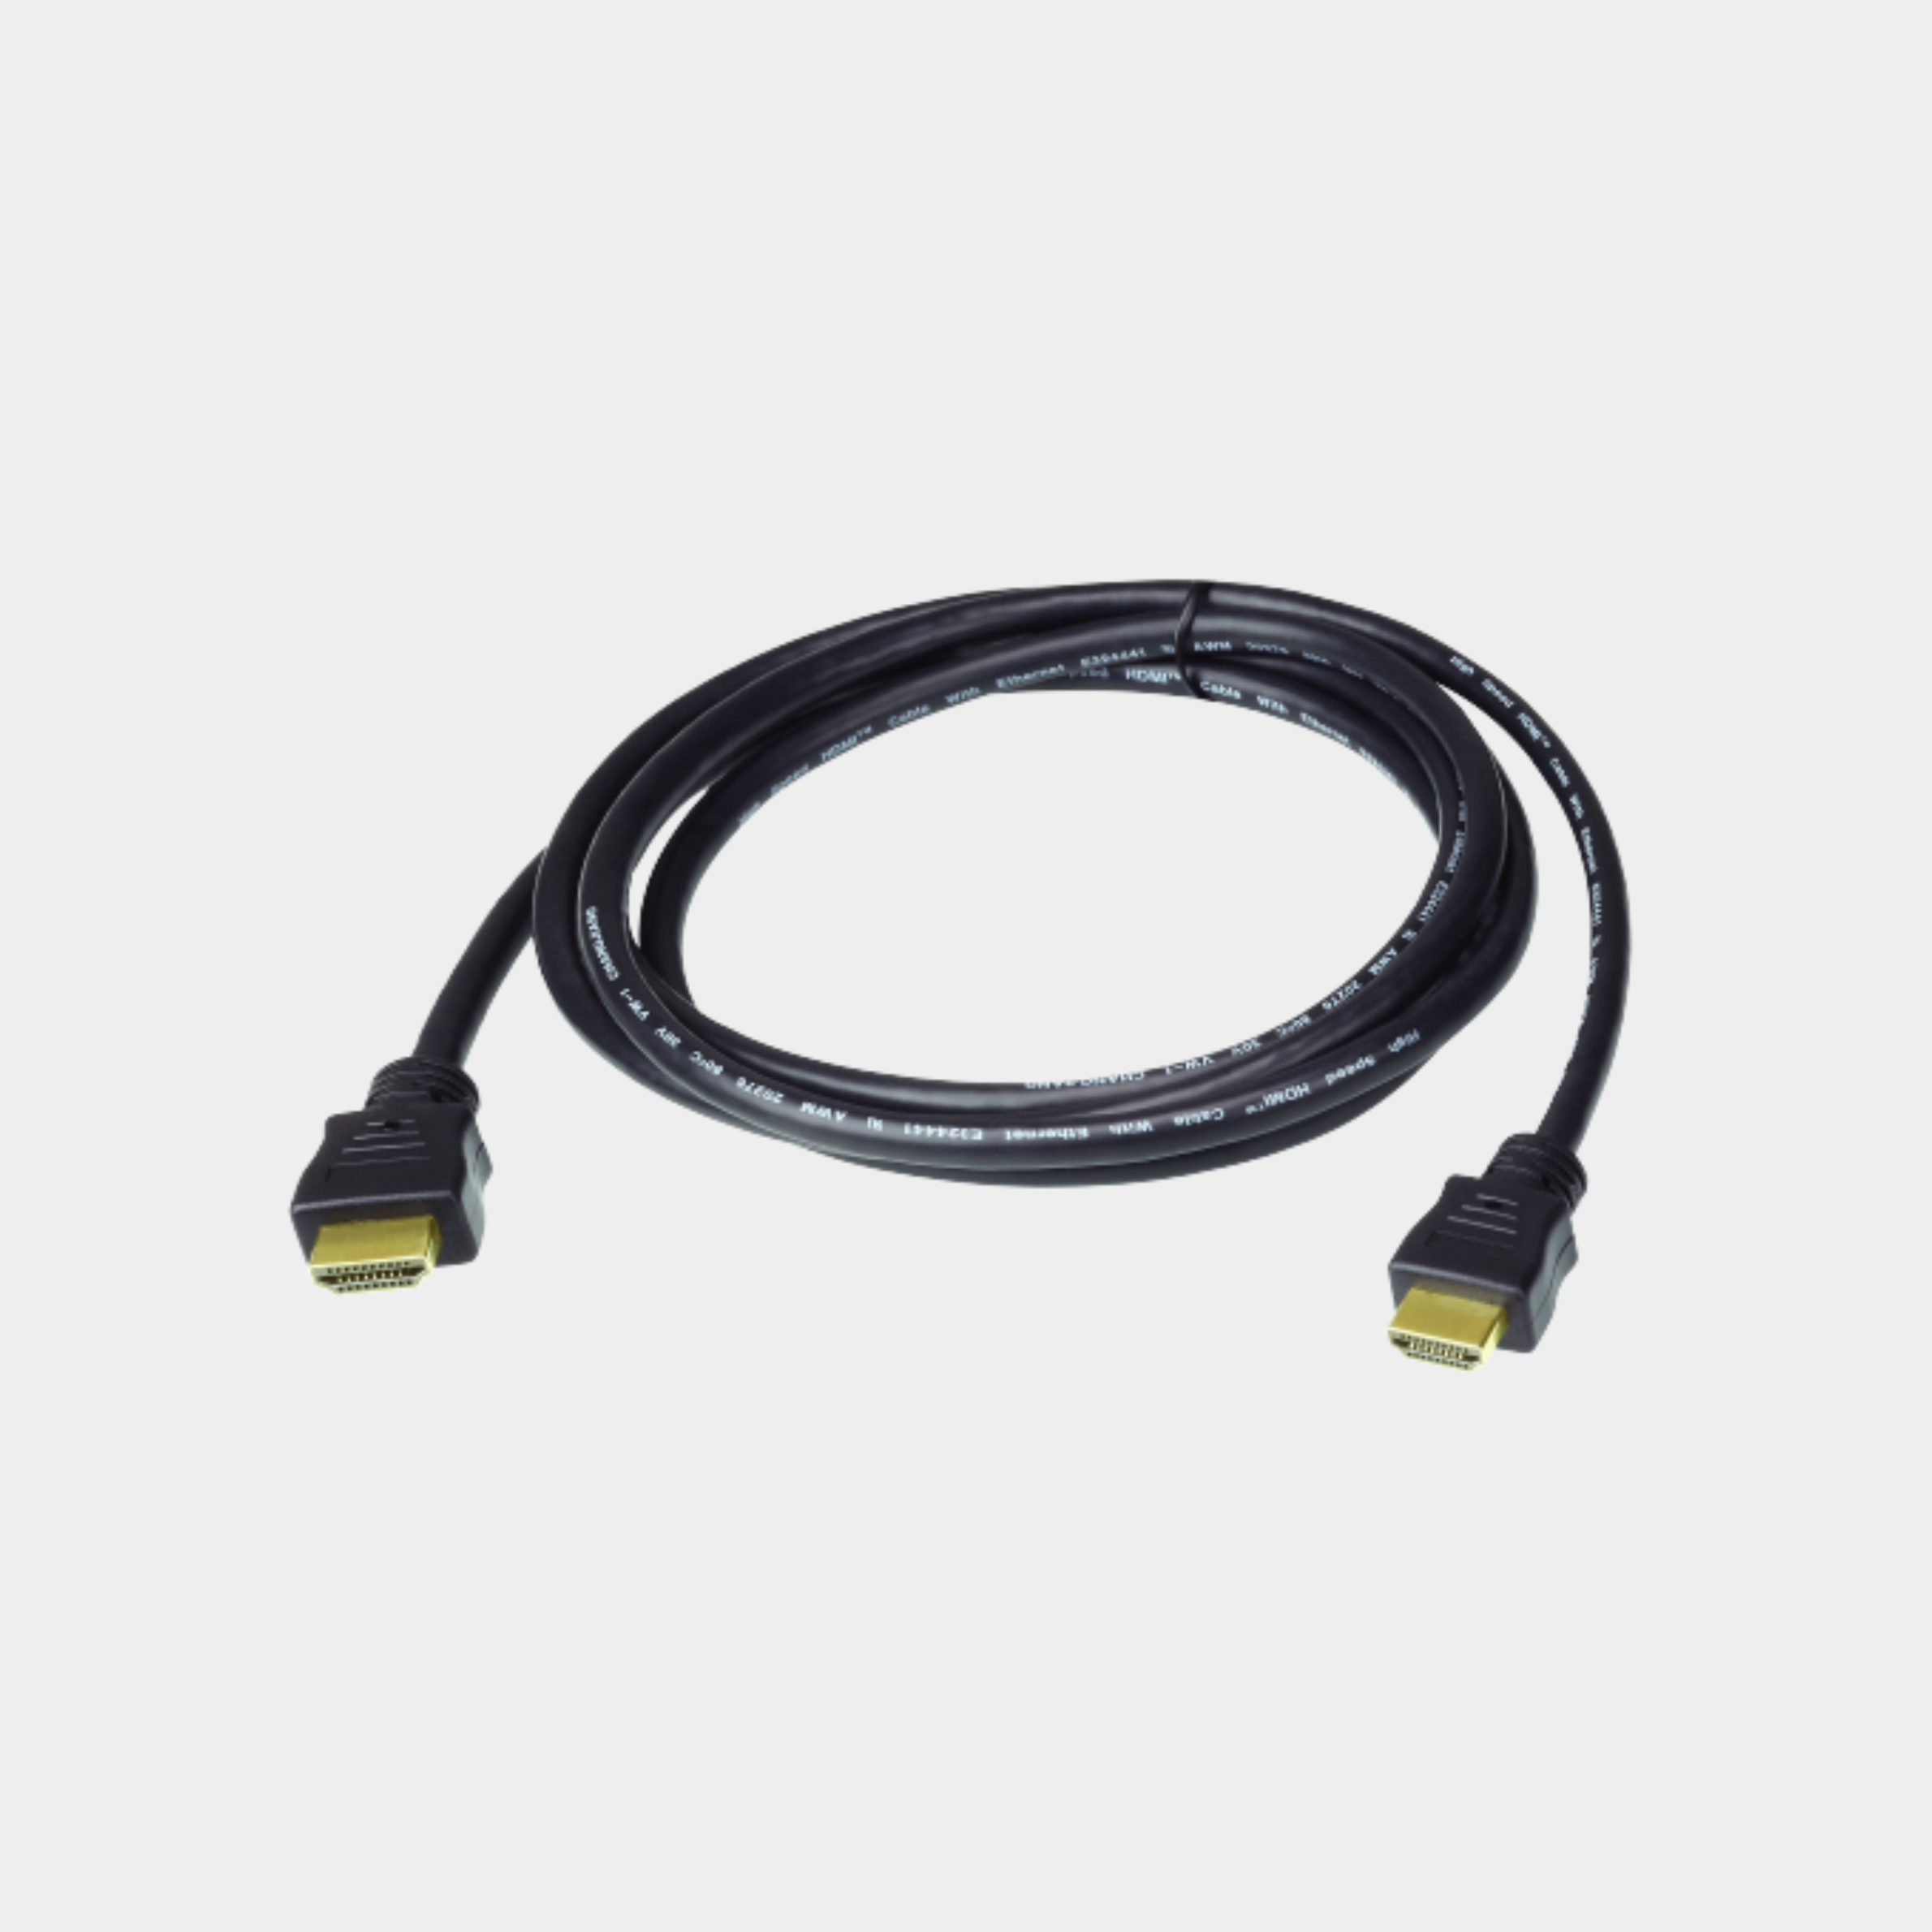 Aten 5 m High Speed True 4K HDMI Cable with Ethernet(ATEN 2L-7D05H-1)